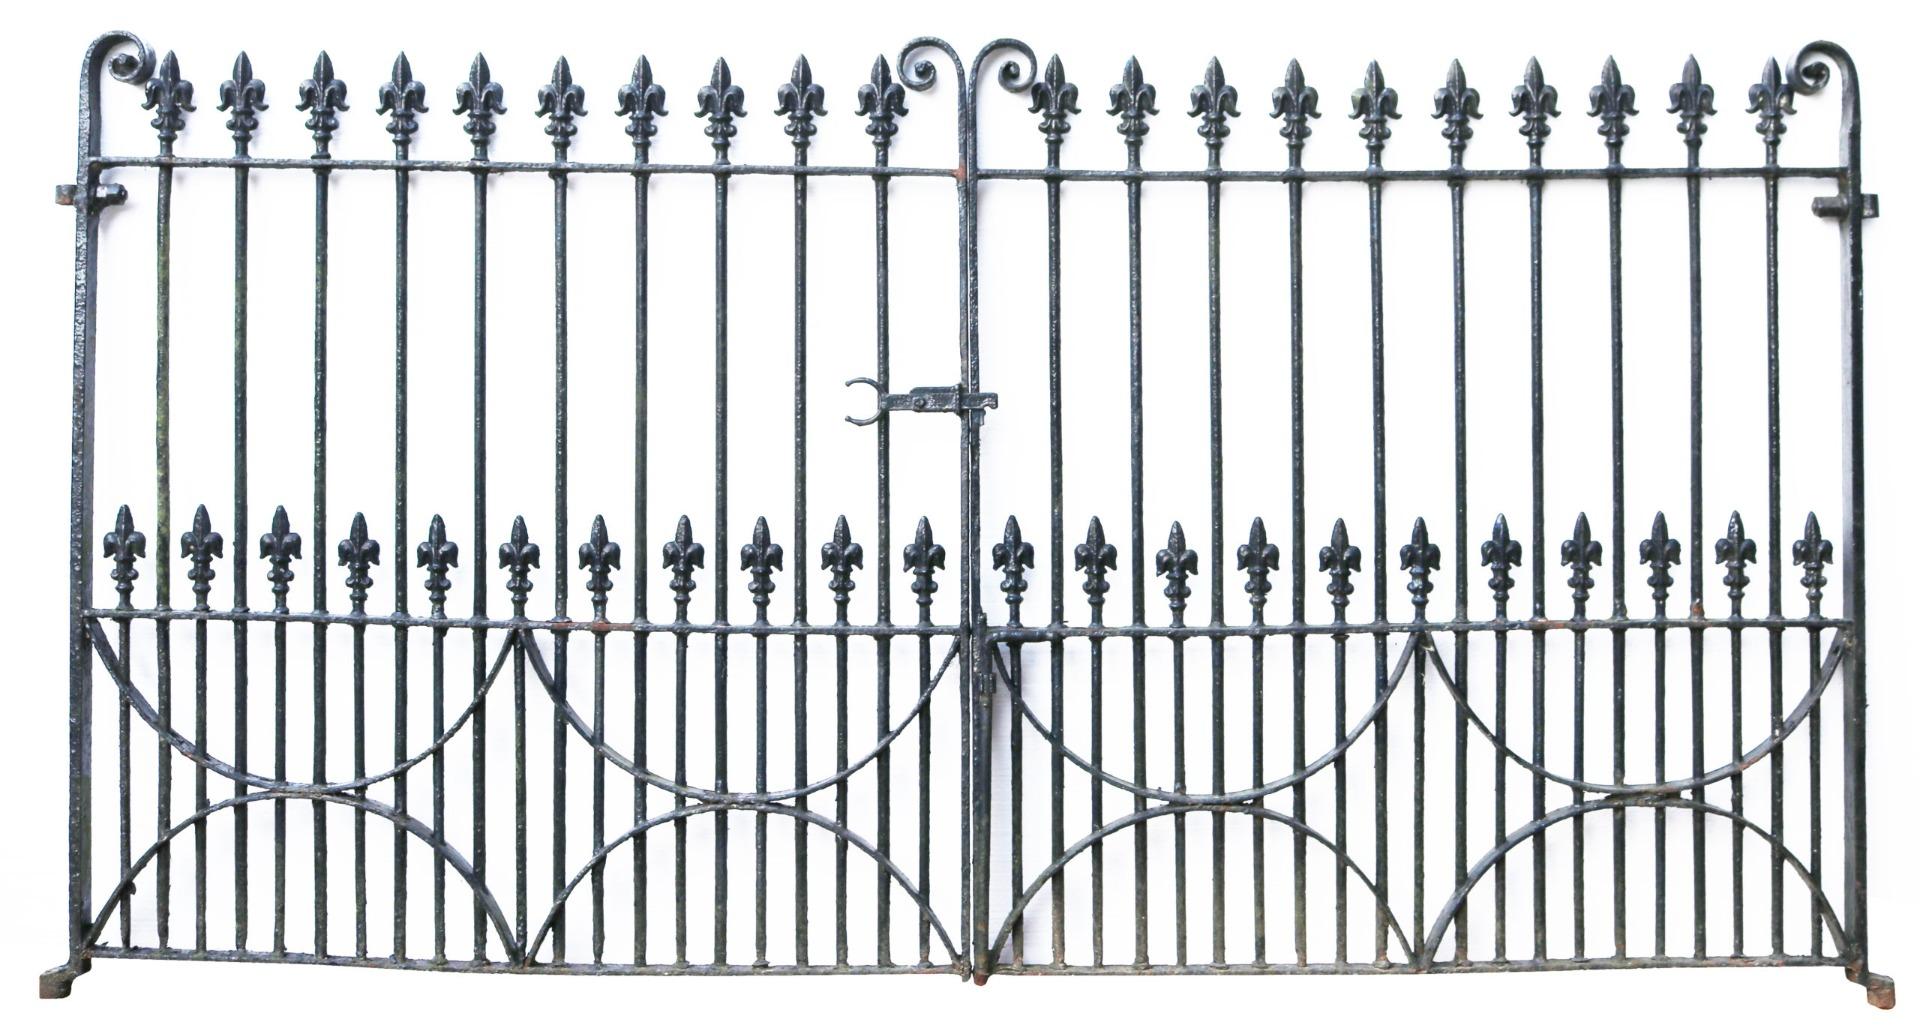 A set of reclaimed mid-Victorian wrought iron driveway gates salvaged from a house near Ipswich. We currently have two sets of the gates available.

Additional dimensions:

For an opening of approximately 311 cm (10'2